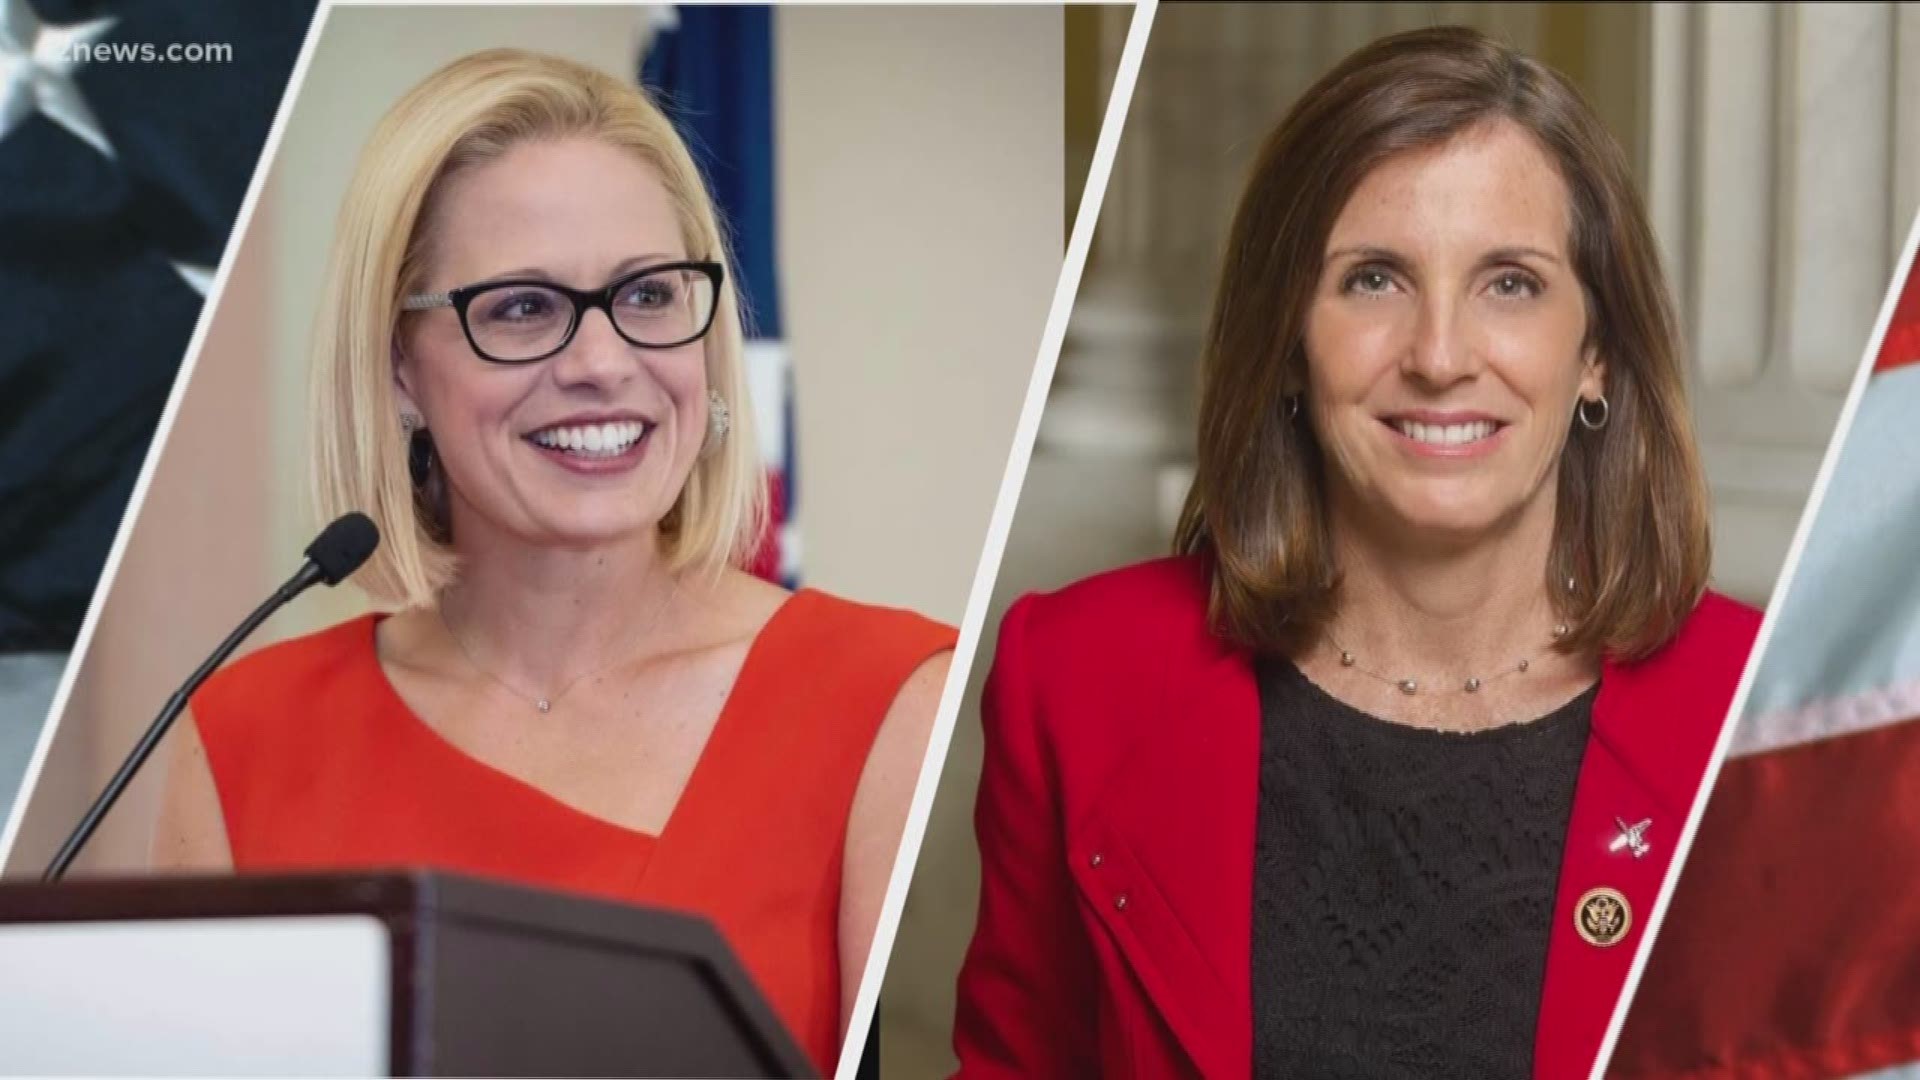 Both Sinema and McSally are running on pro-military platforms. We look at the claims each candidate is making.